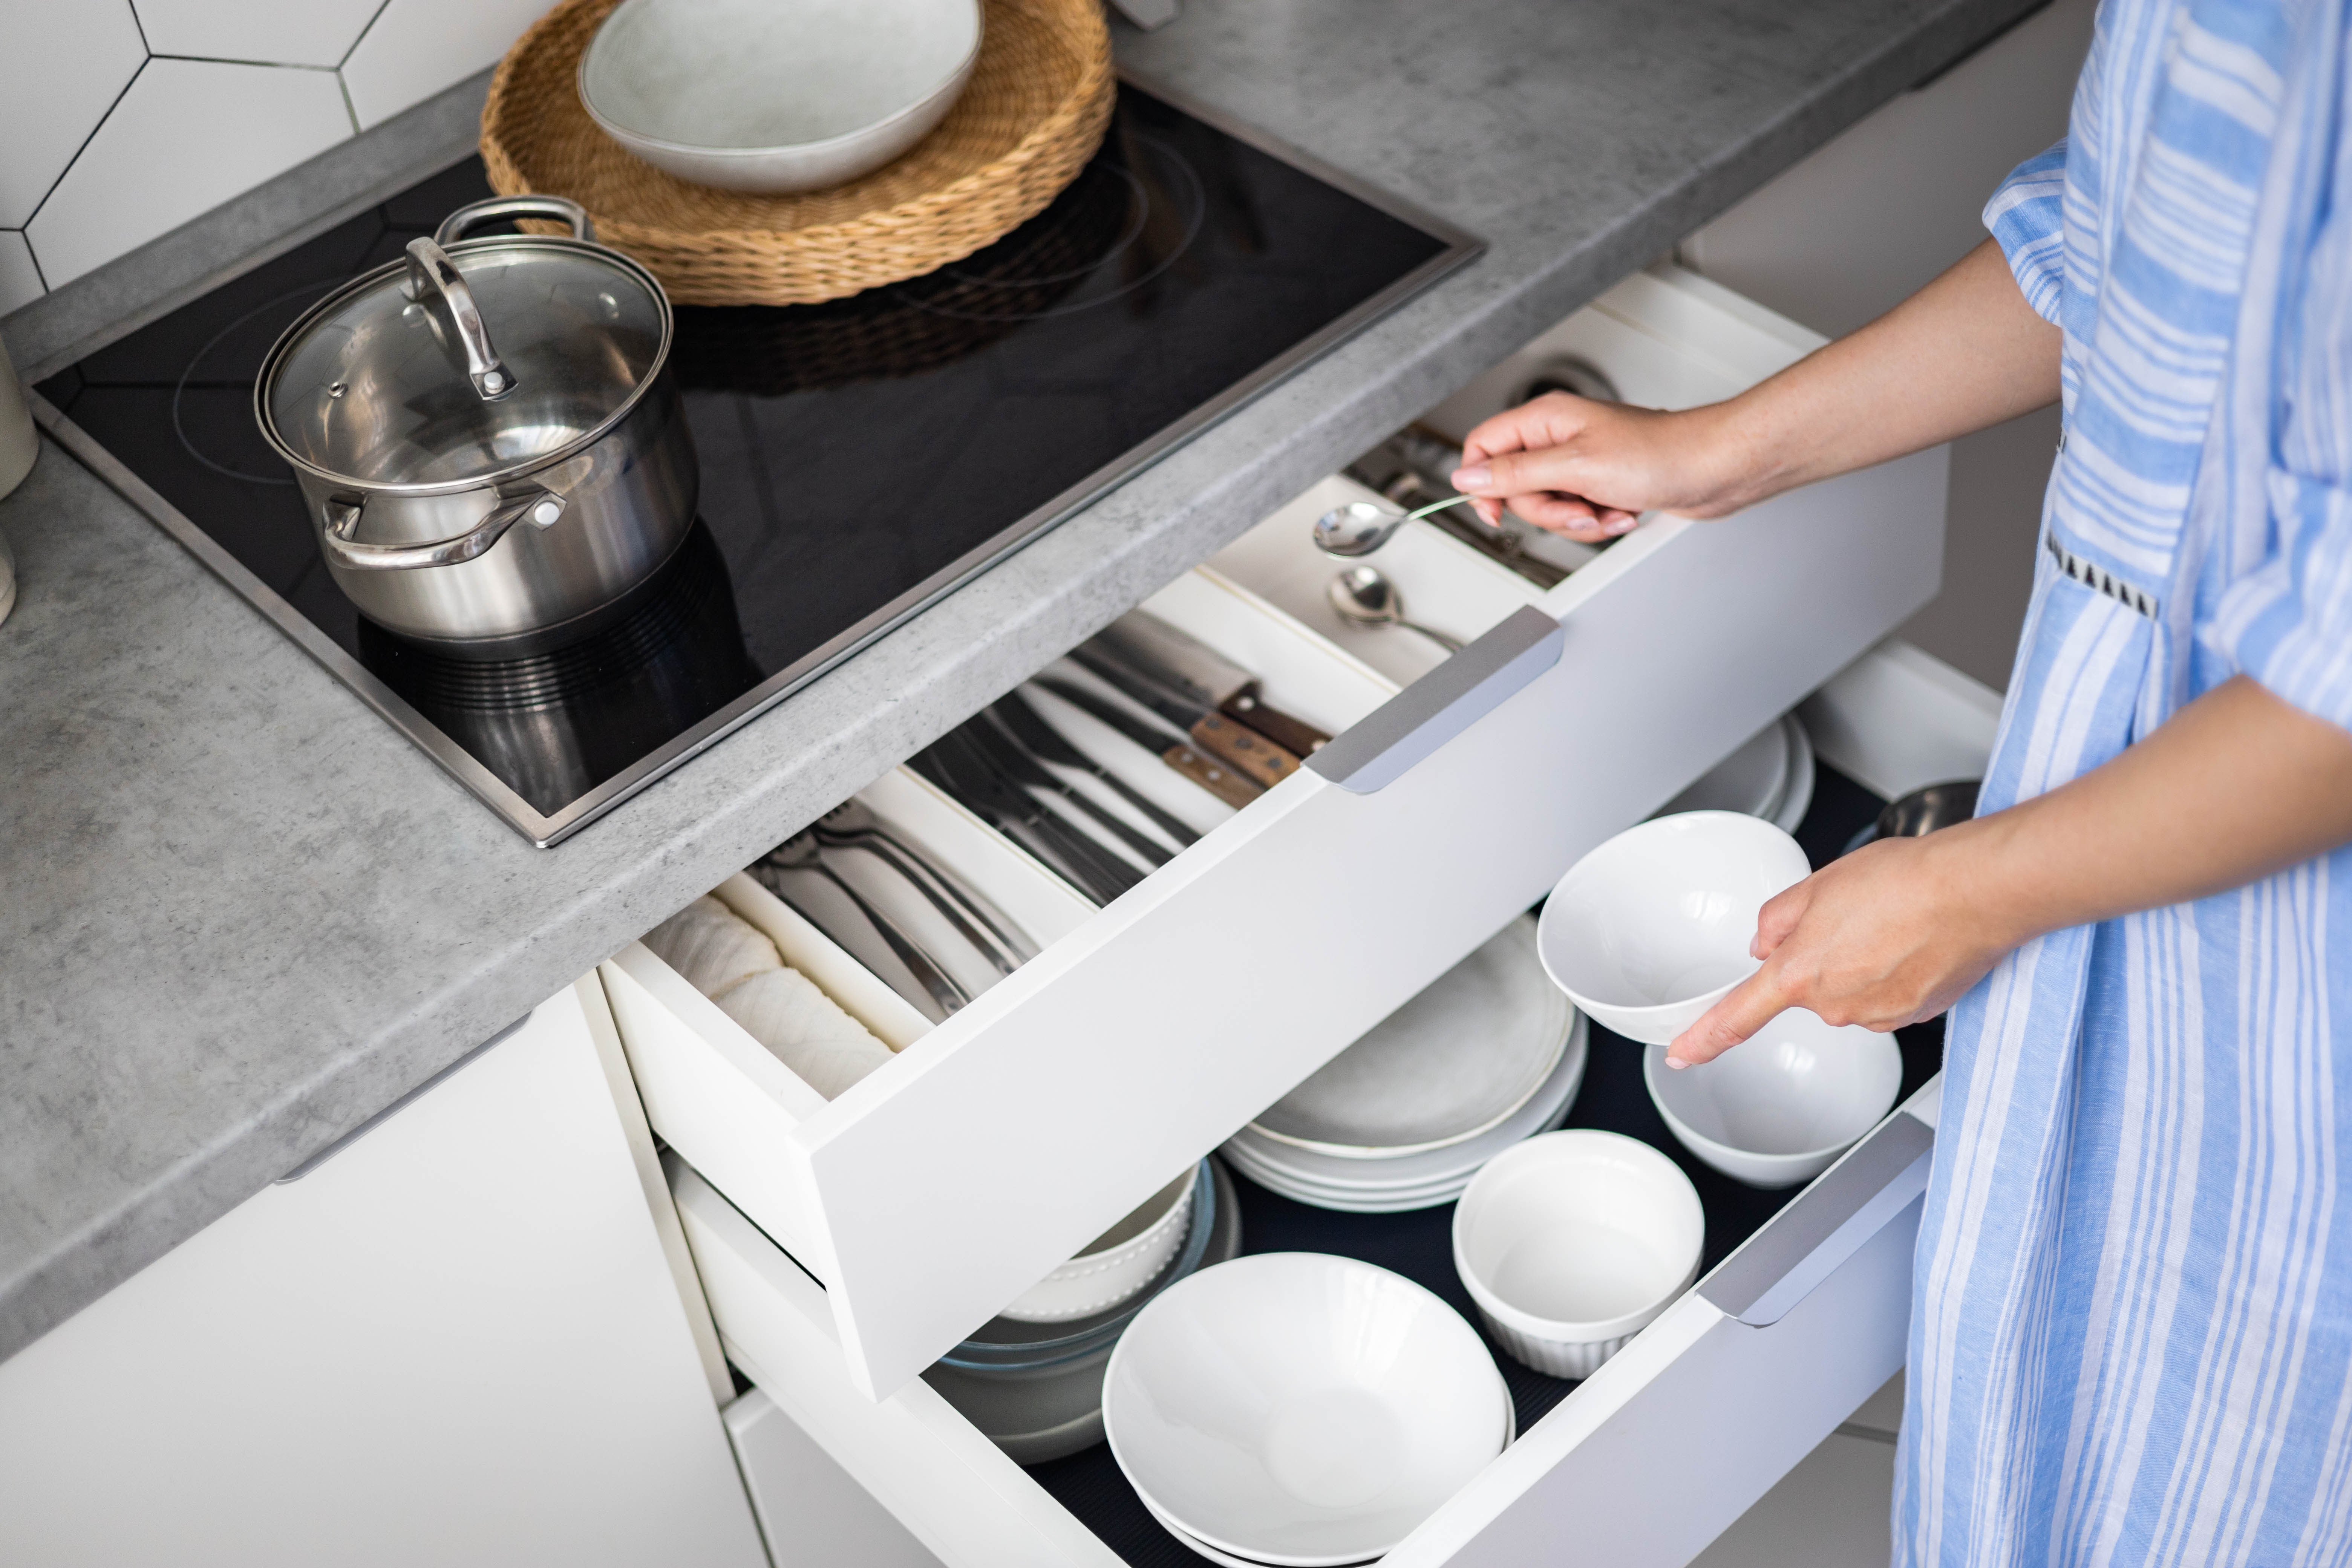 Woman putting away dishes